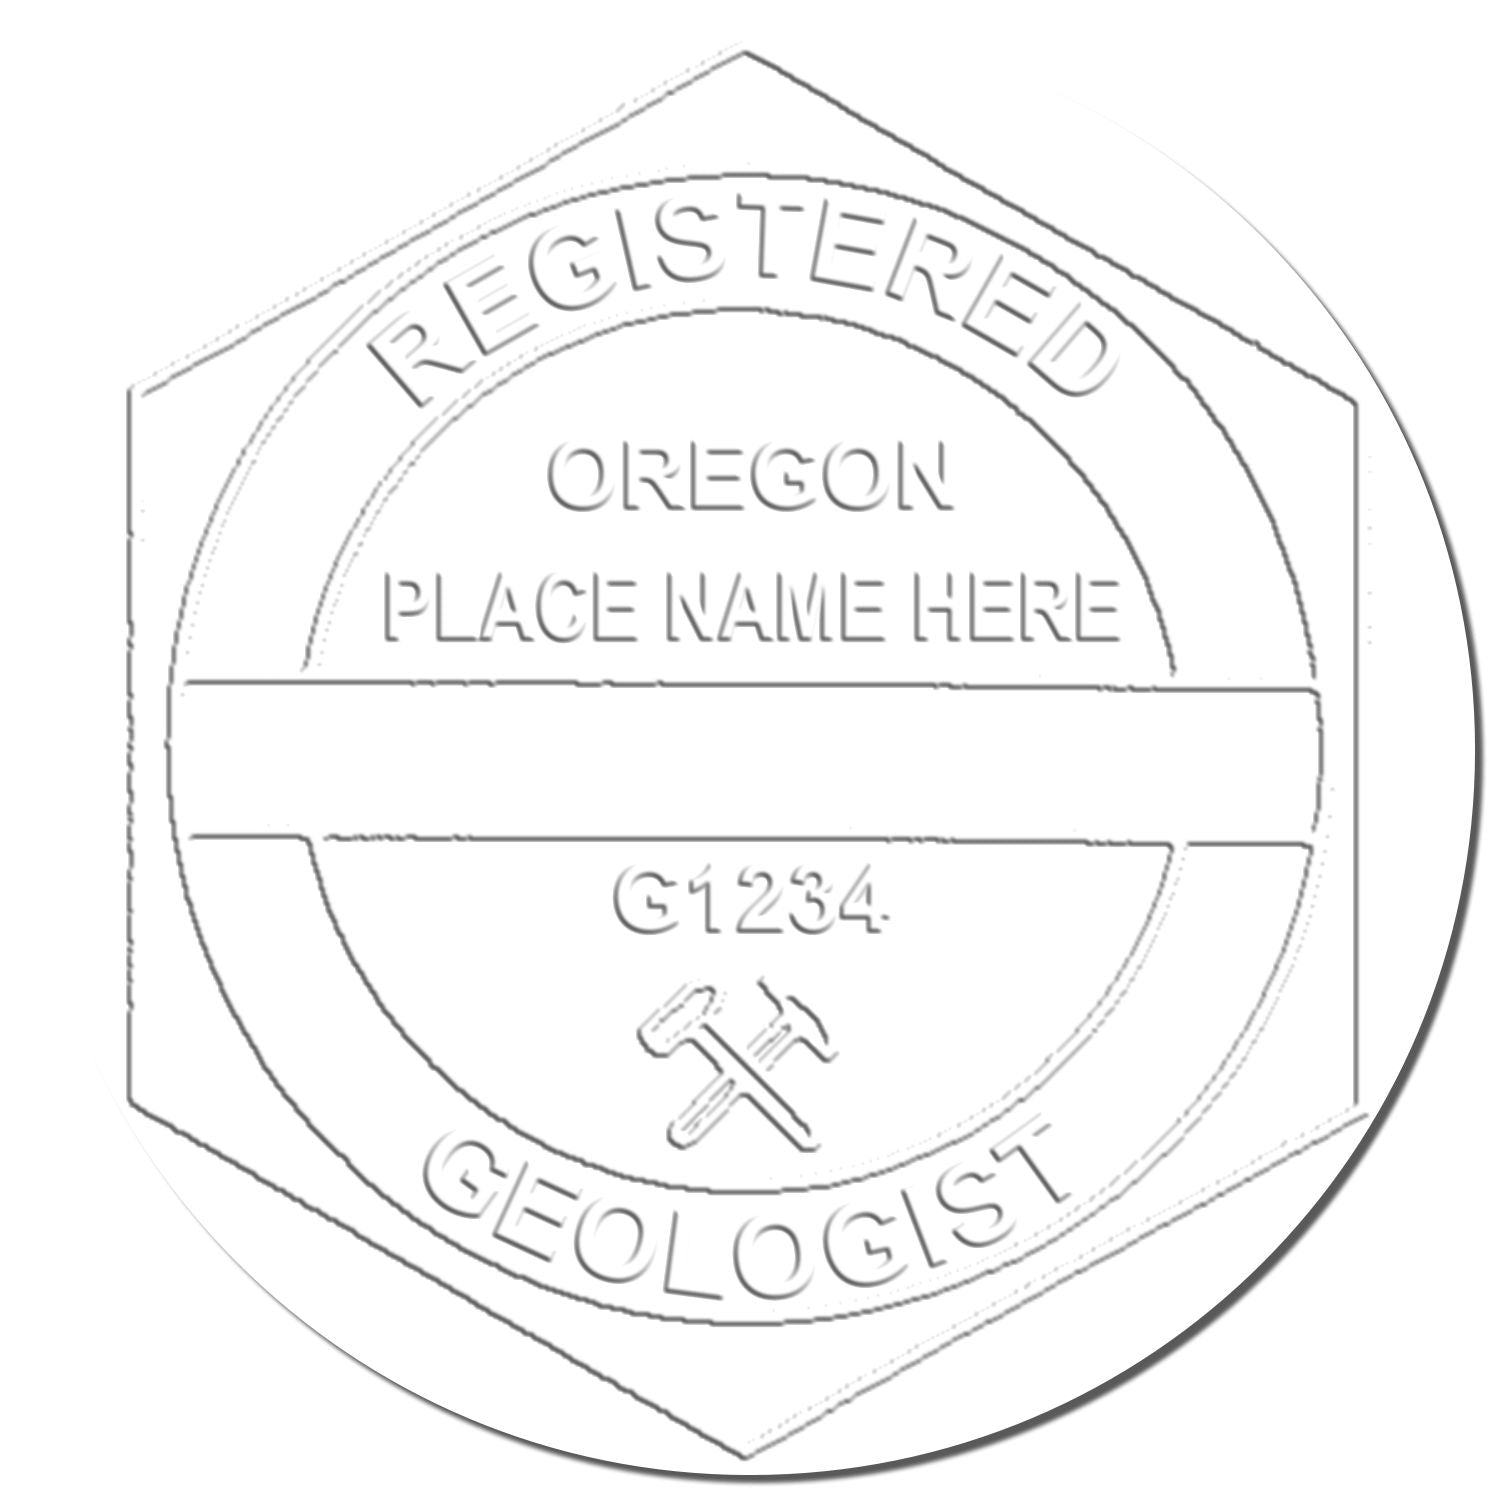 The main image for the Oregon Geologist Desk Seal depicting a sample of the imprint and imprint sample